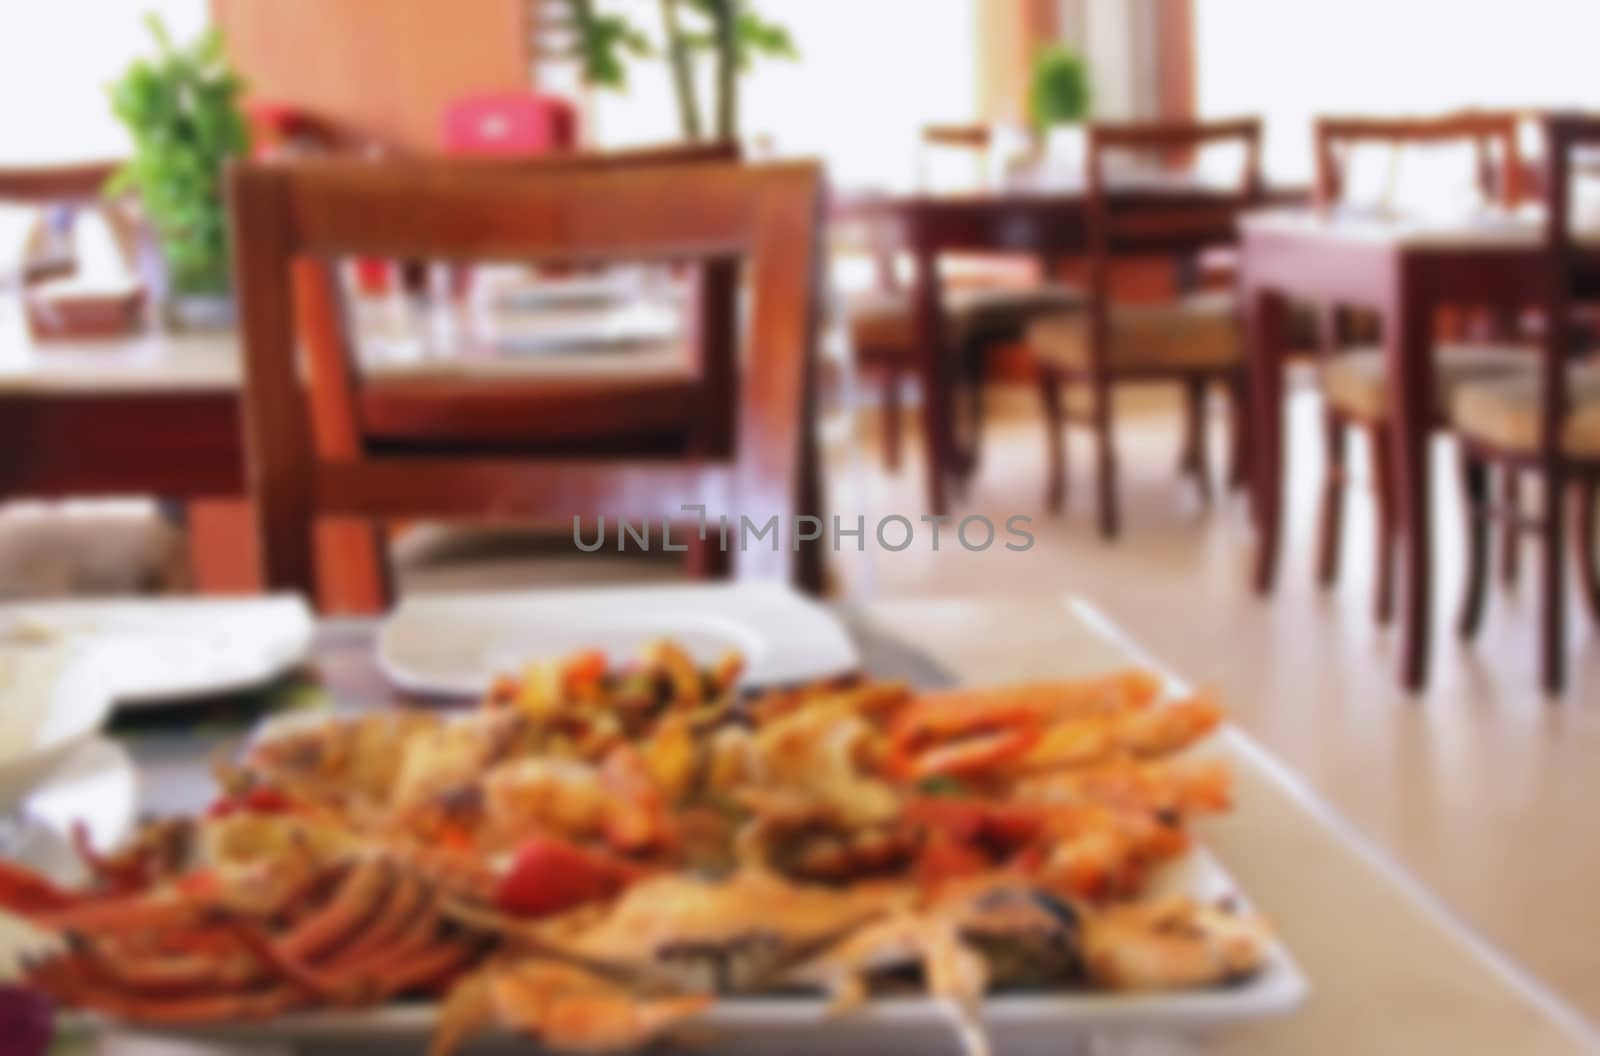 seafood grill in a large plate in a restaurant or cafe decorated table with food, blurred